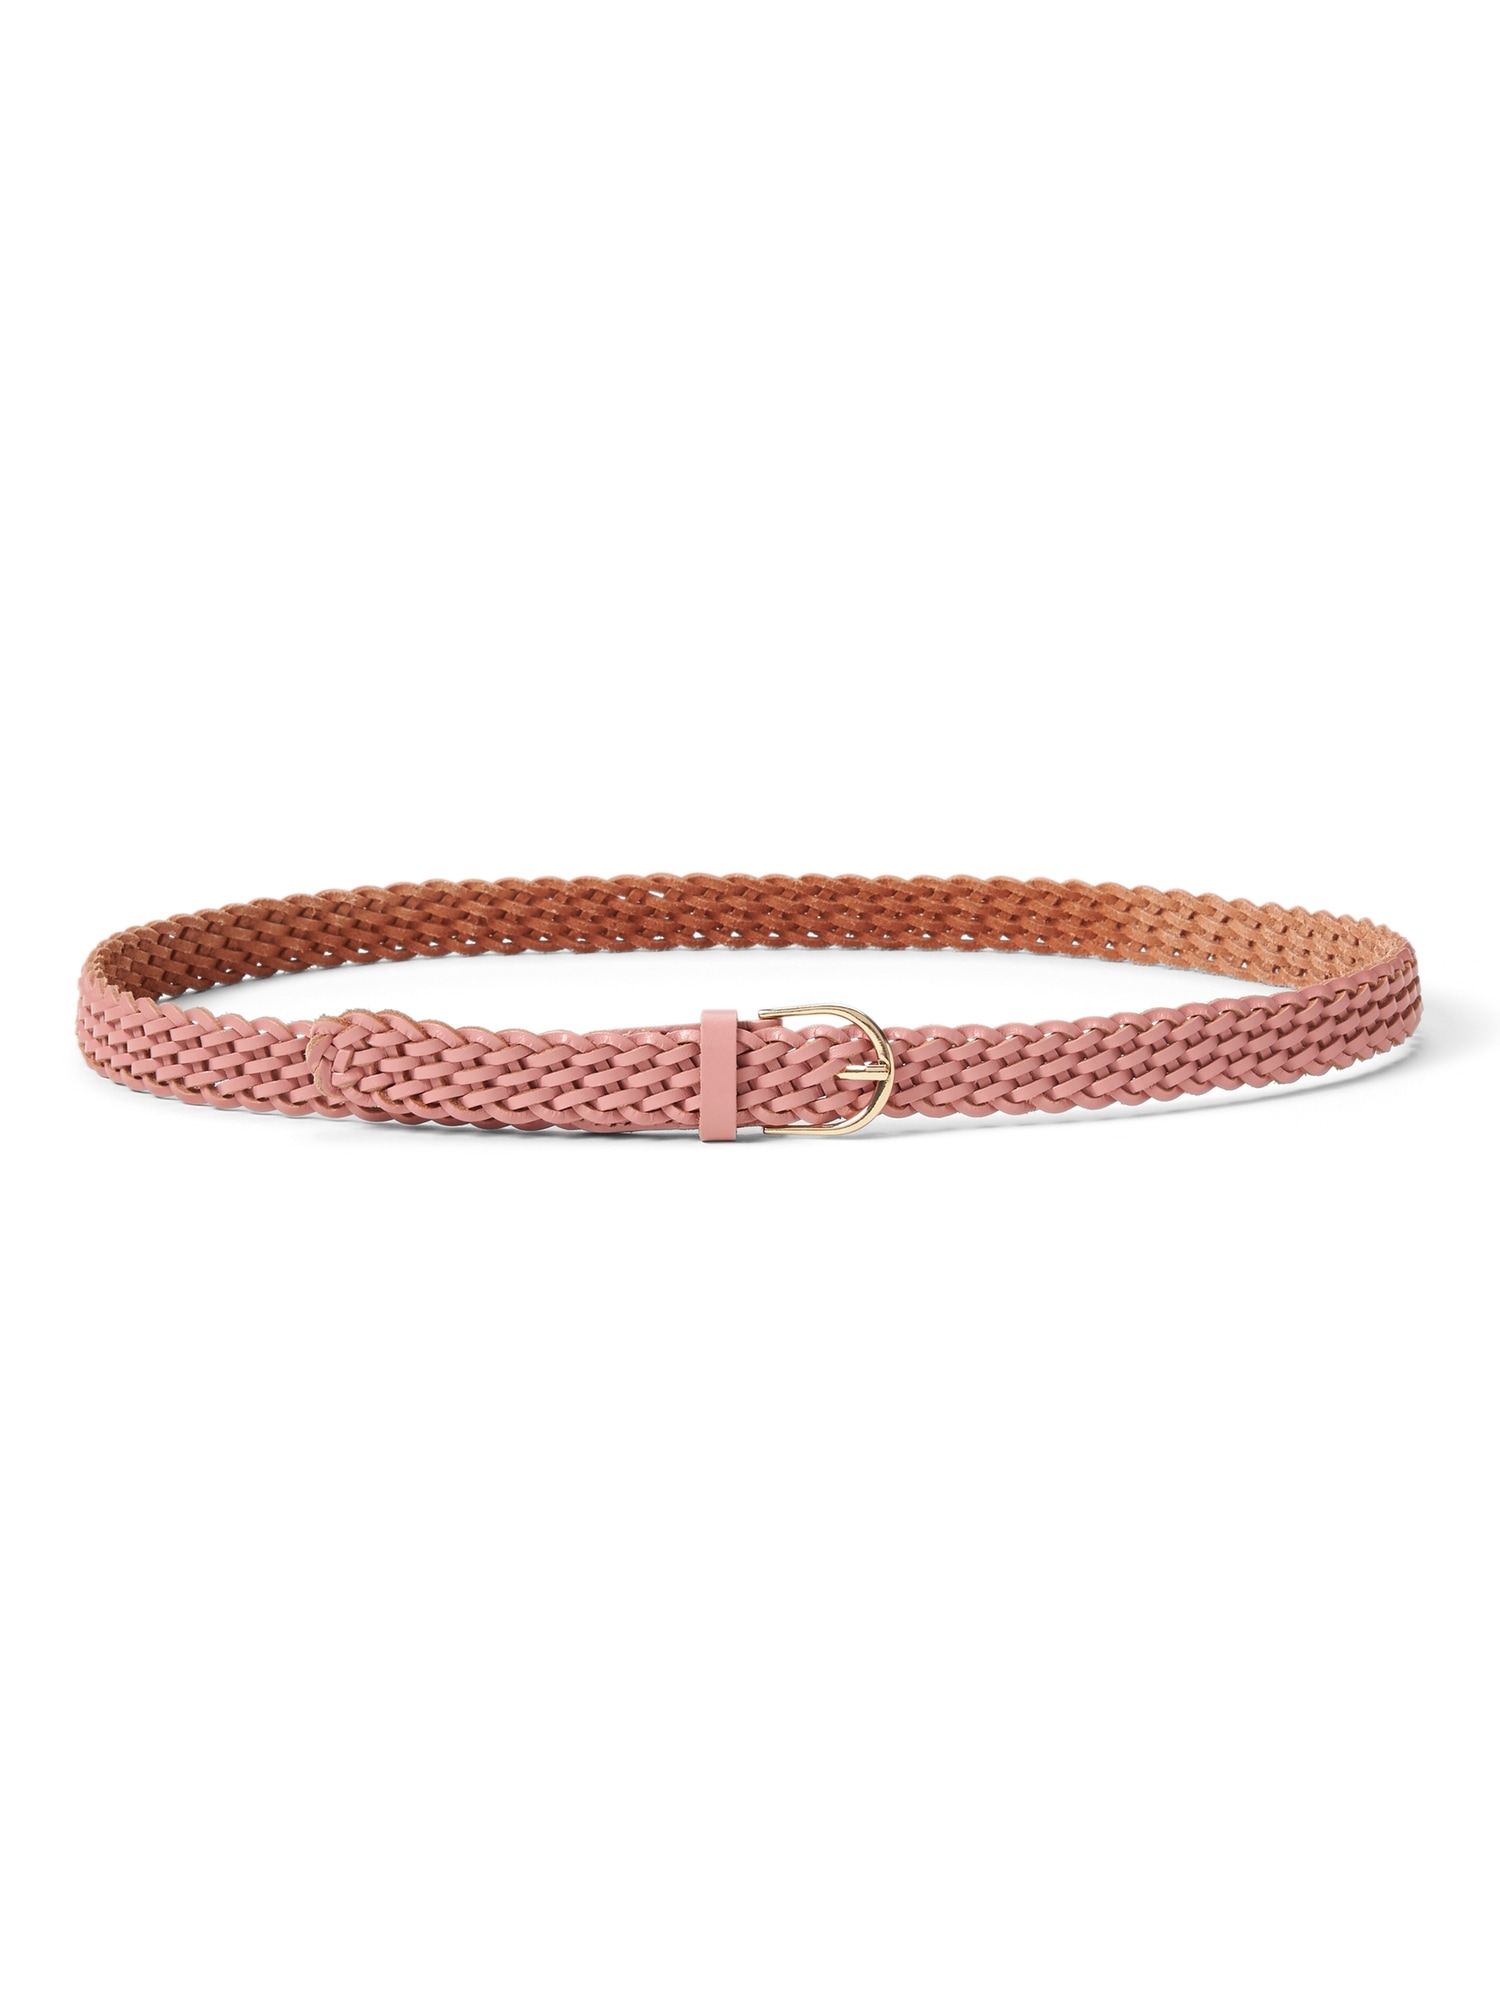 Braided Leather Small Trouser Belt